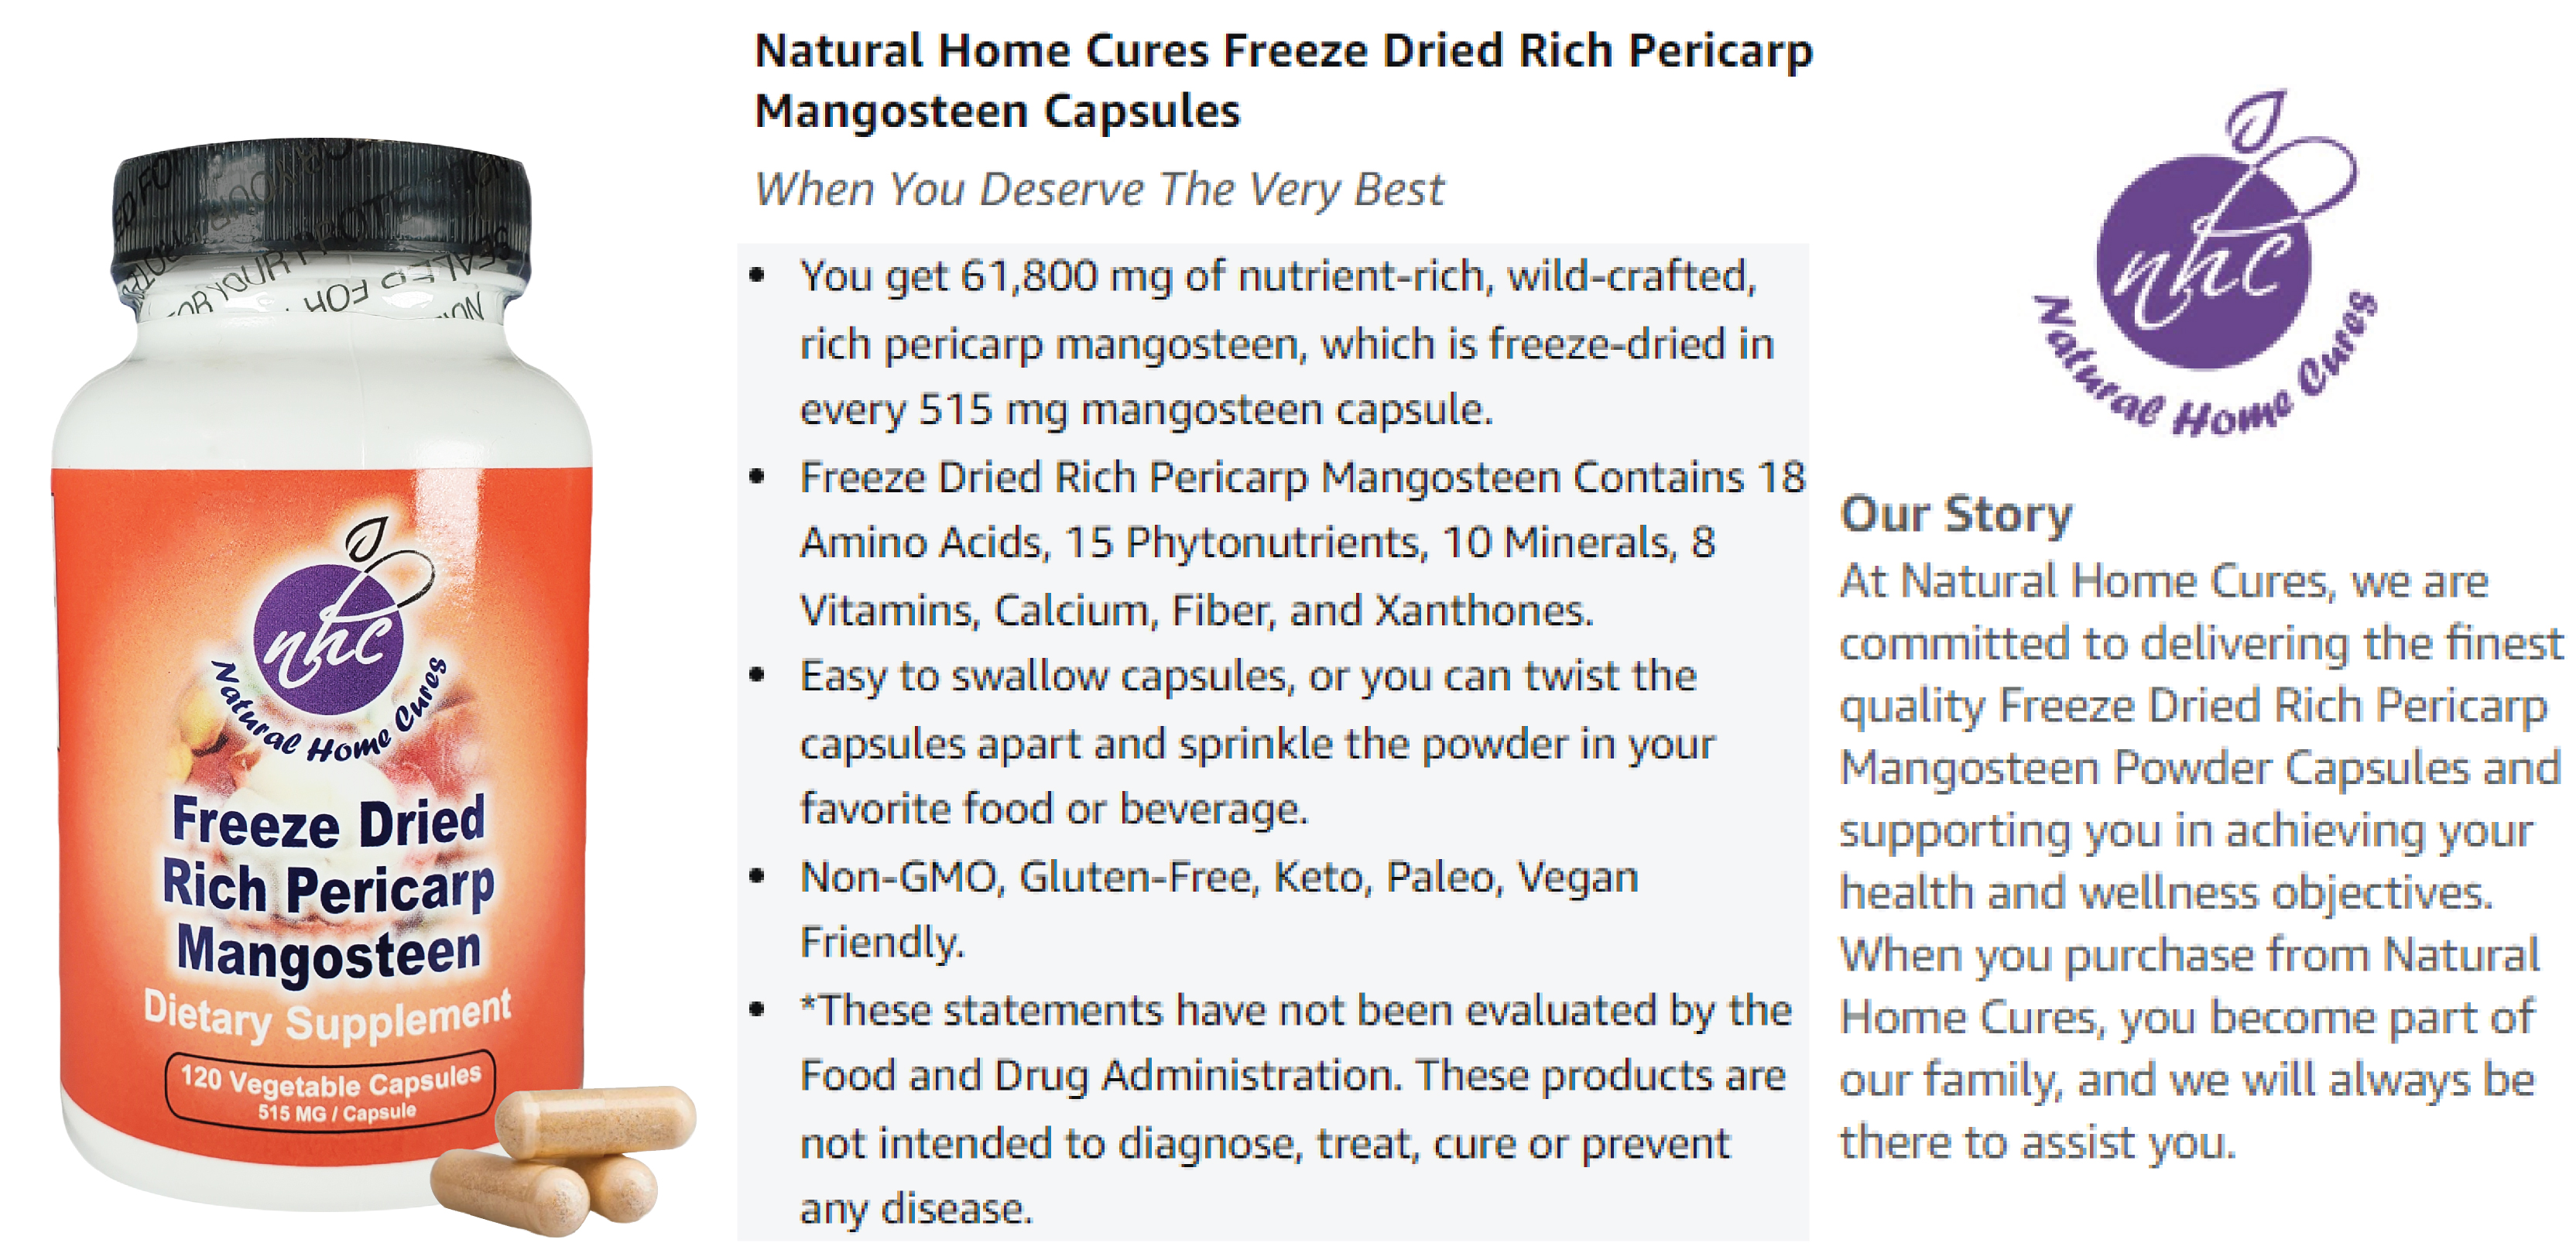 Natural Home Cures Freeze Dried Rich Pericarp Mangosteen Our Story